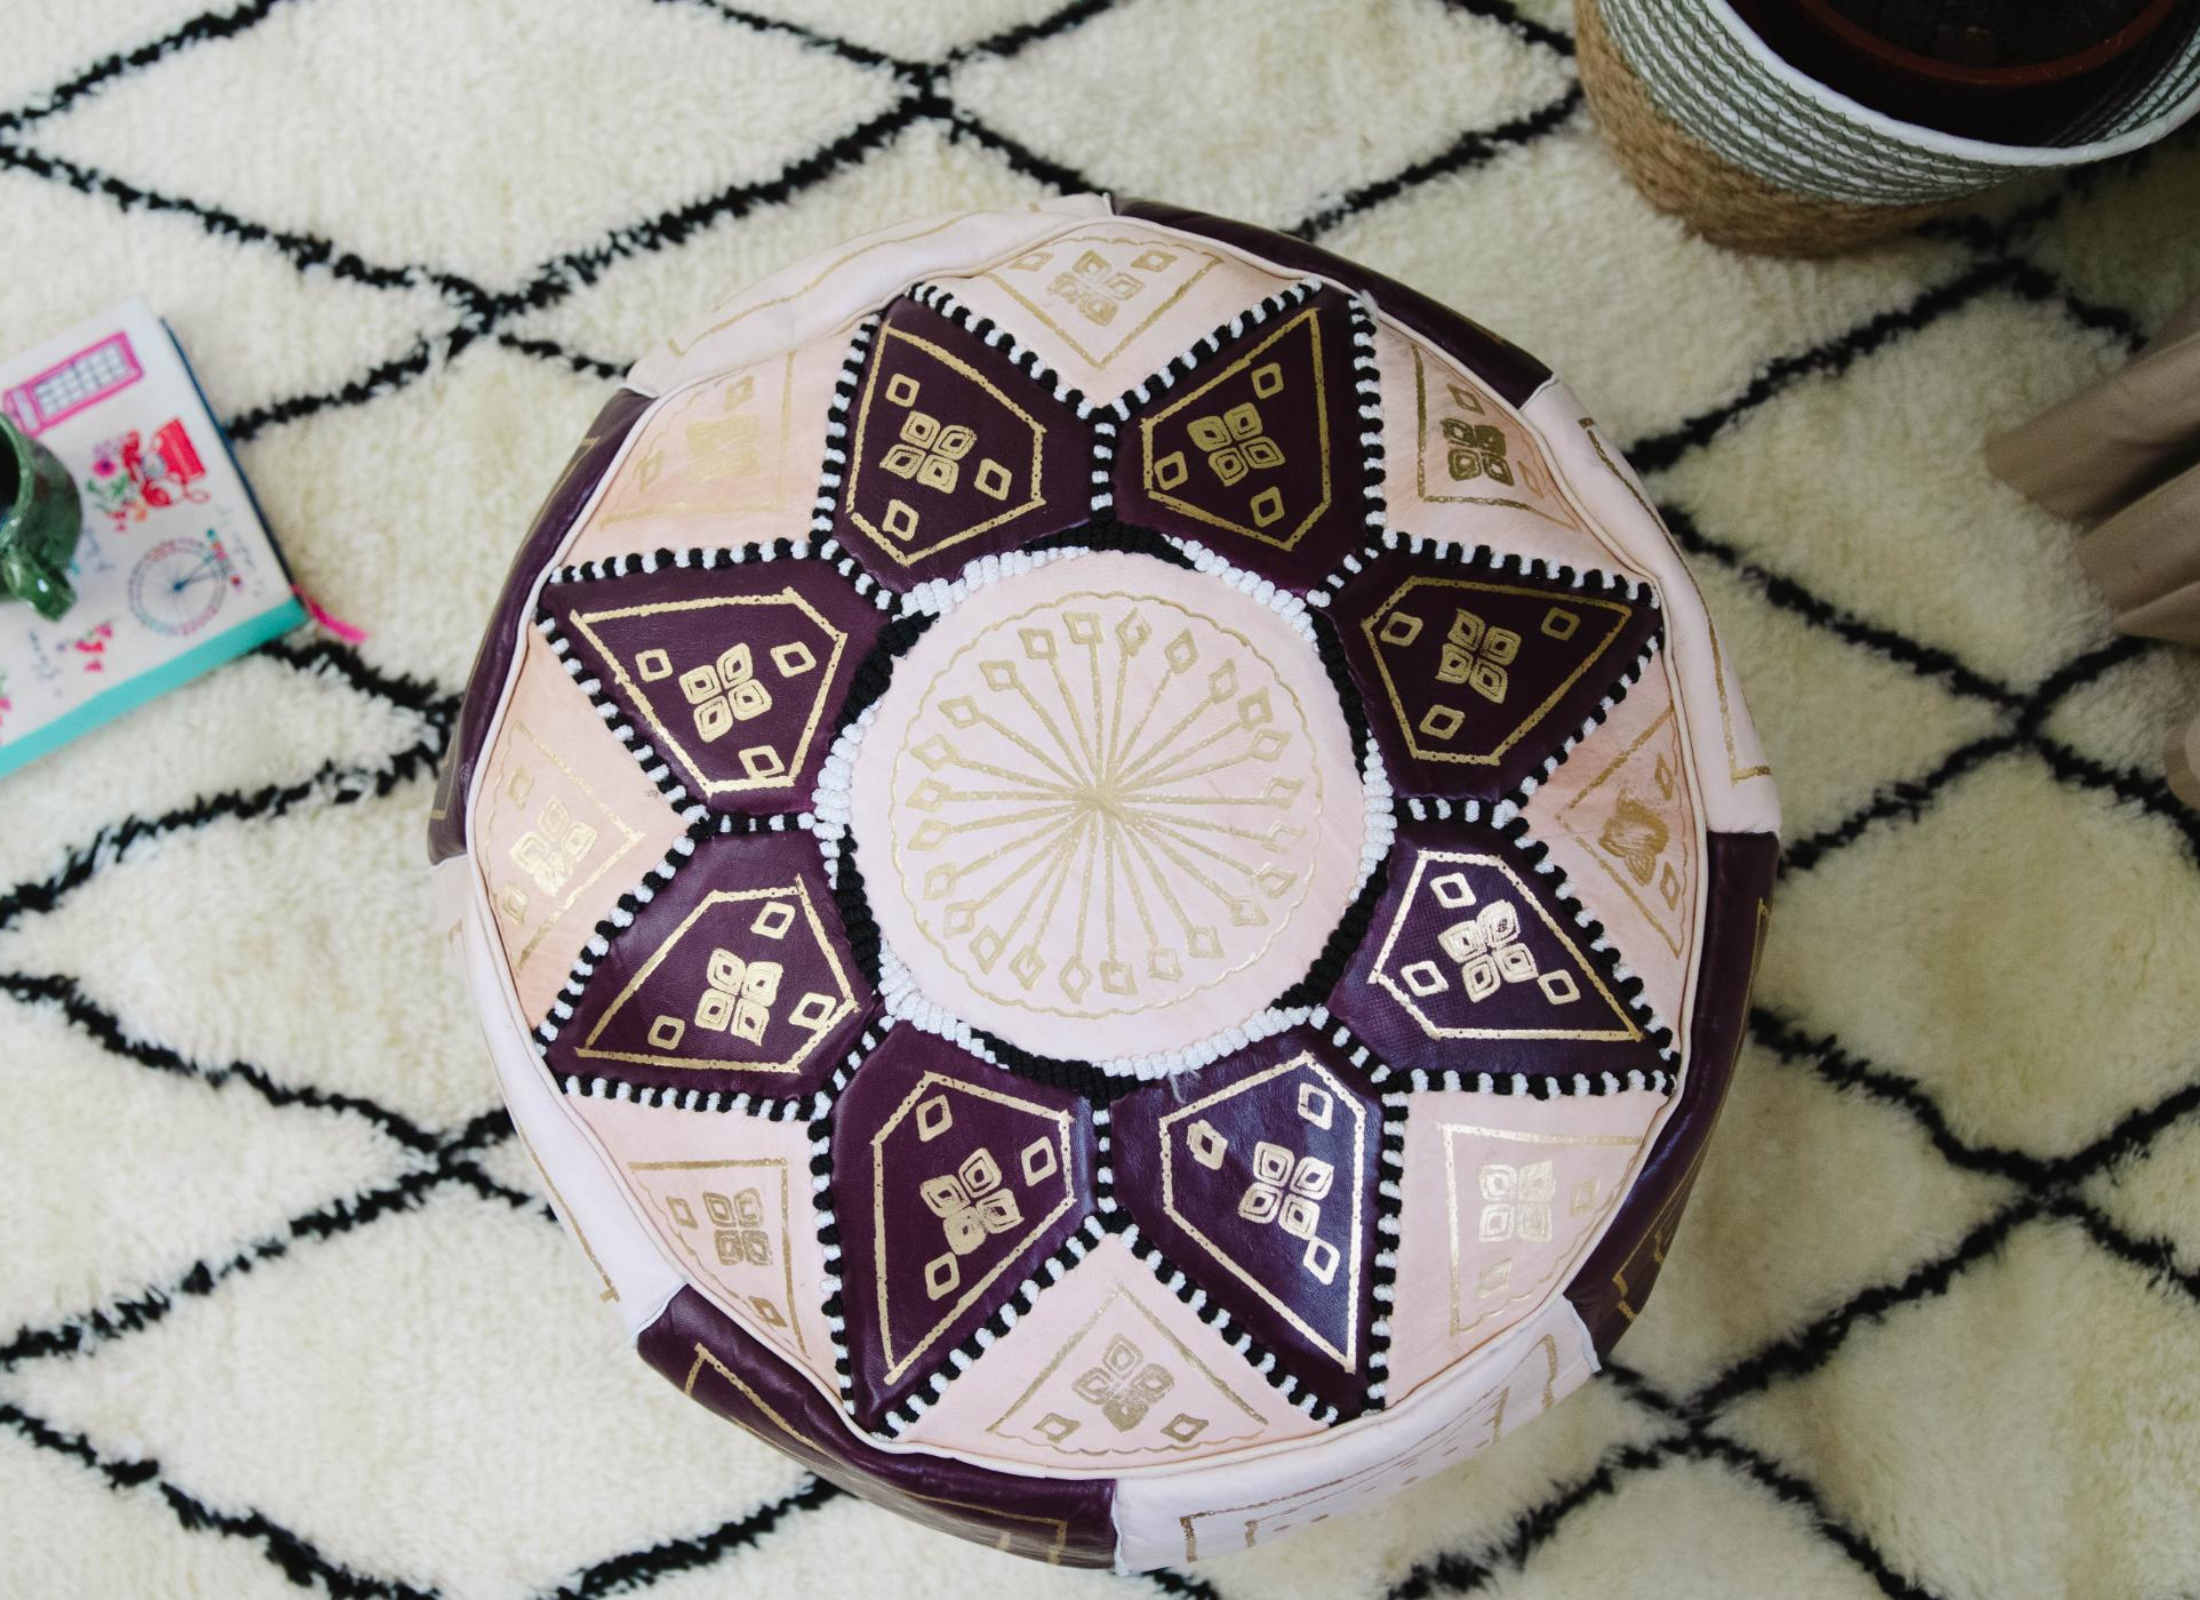 Moroccan Leather Pouf in Chocolate & Gold - Leather Poufe Ottoman Floor Pouffs